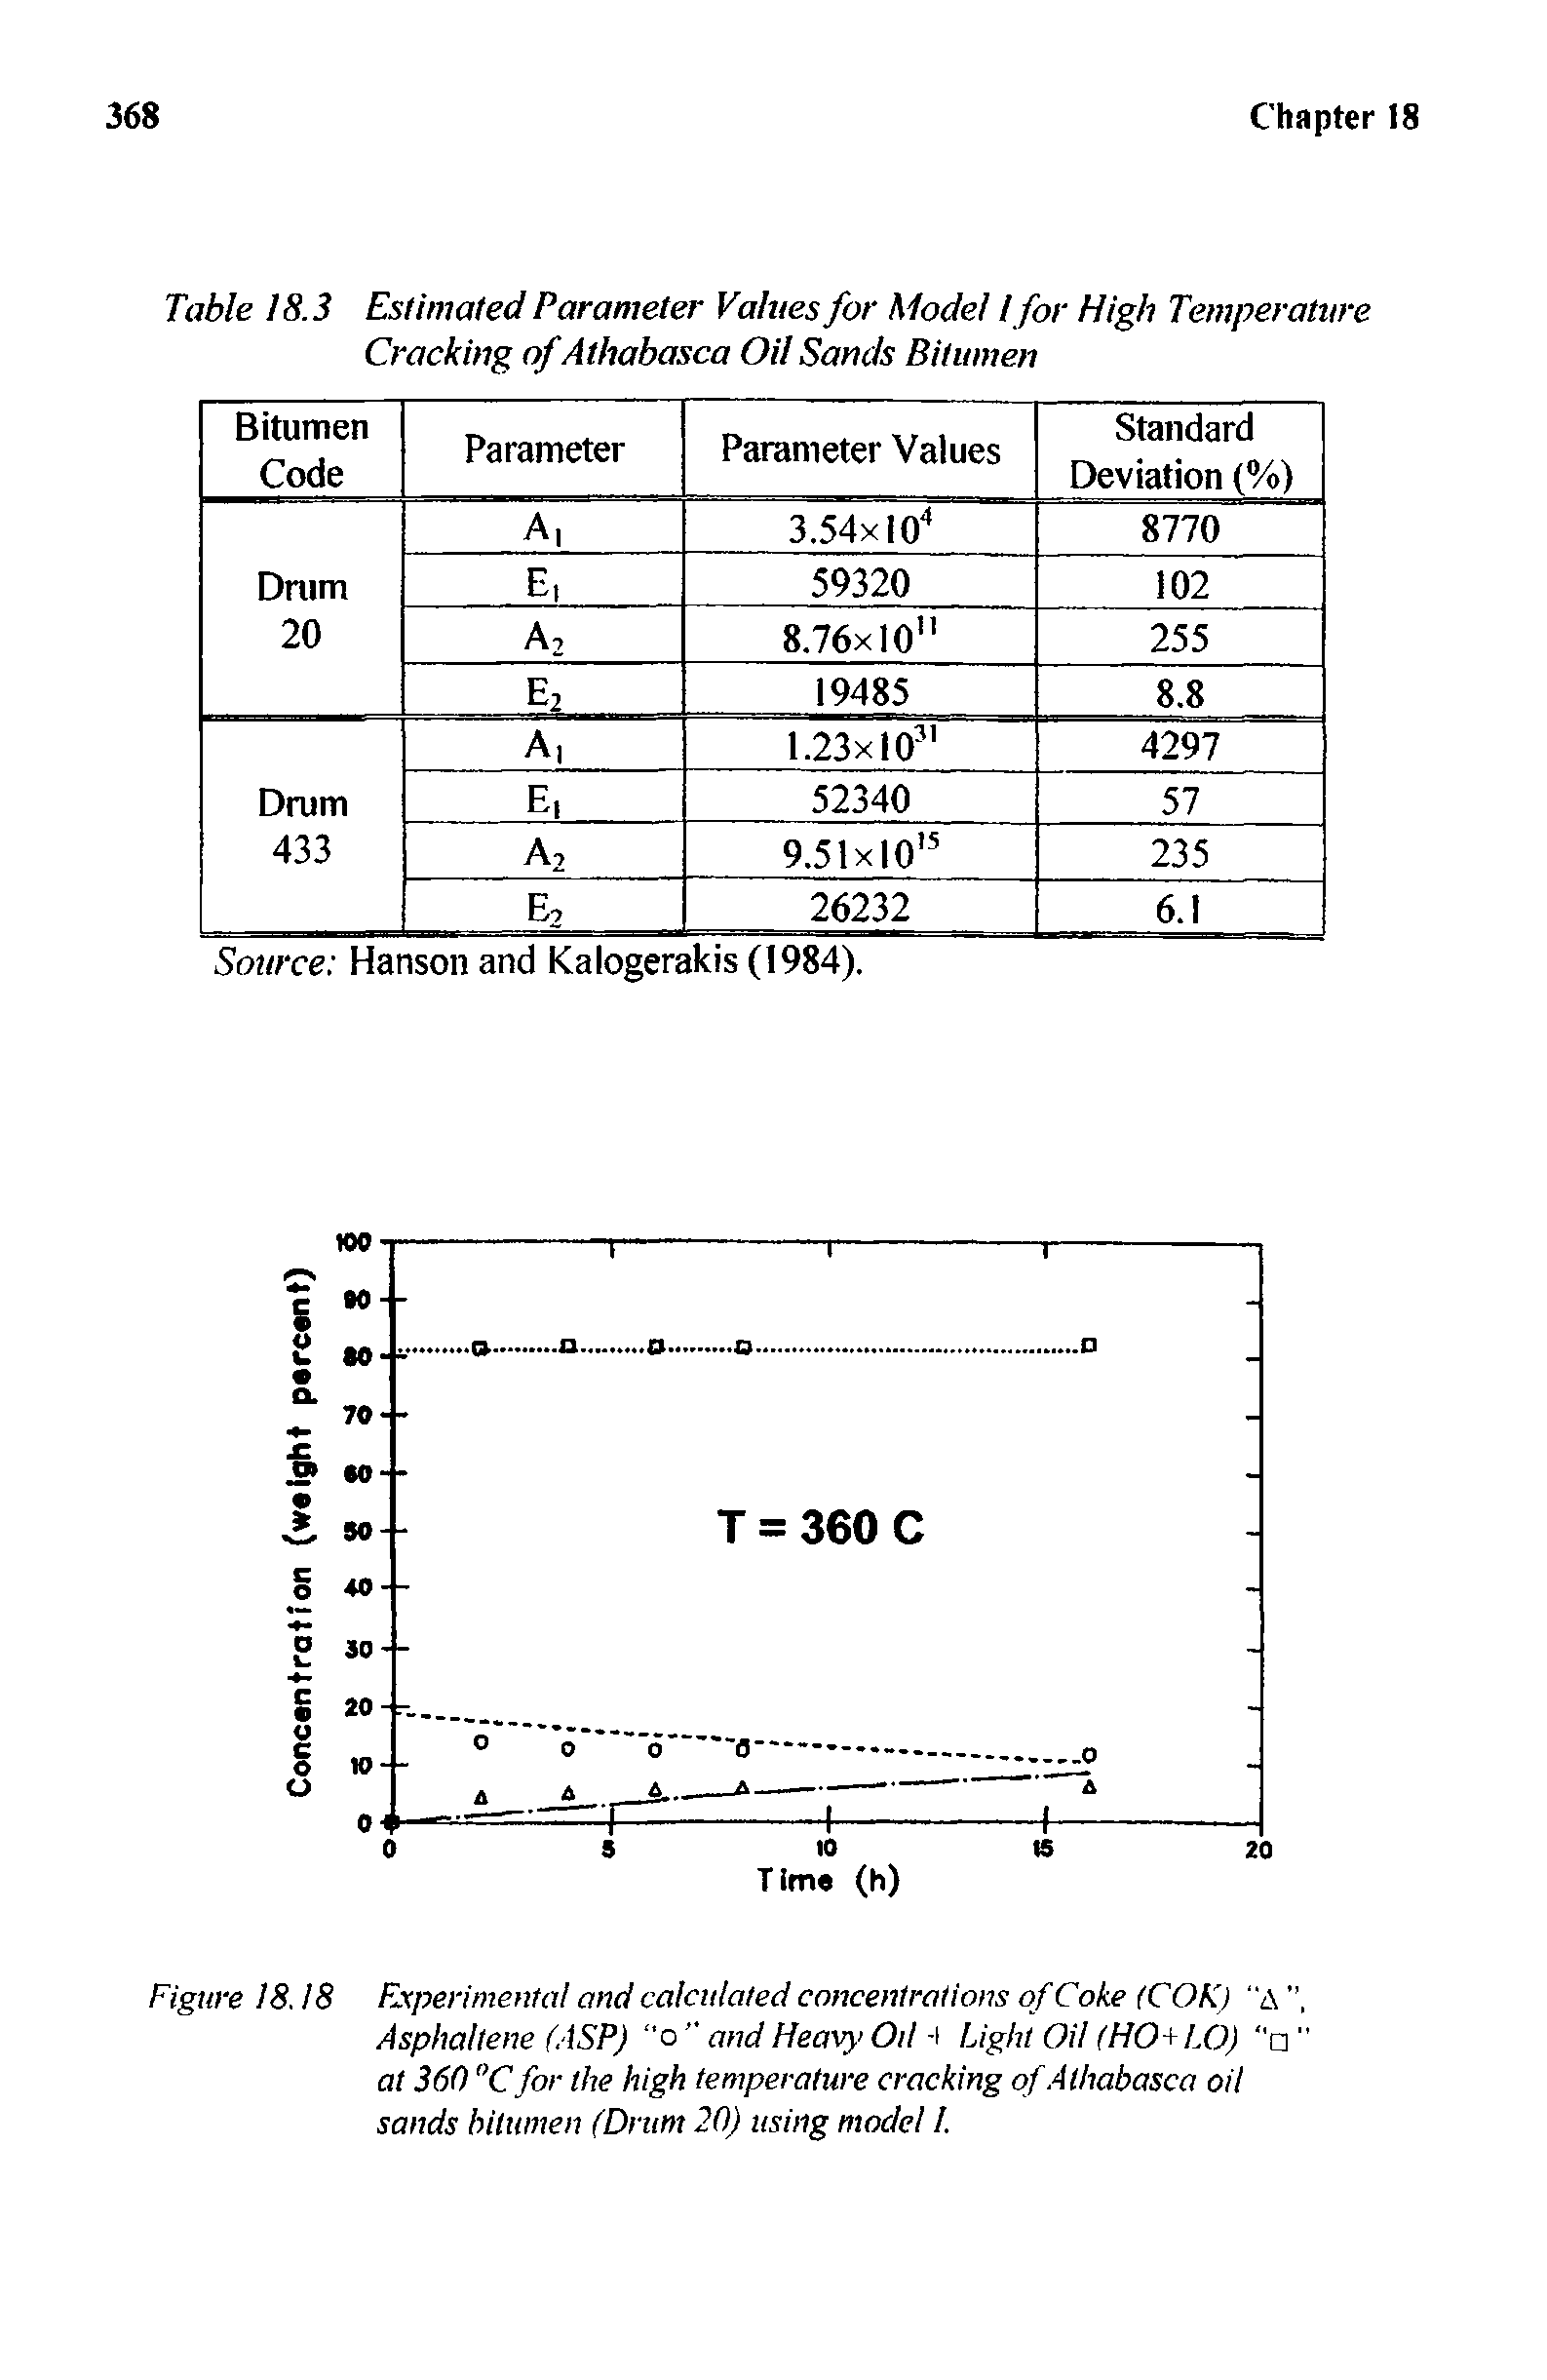 Figure 18.18 Experimental and calculated concentrations of Coke (COK) "a ", Asphaltene (ASP) "o and Heavy Oil -i Light Oil (HO+LO) " at 360 °C for the high temperature cracking of Athabasca oil sands bitumen (Drum 20) using mode /.